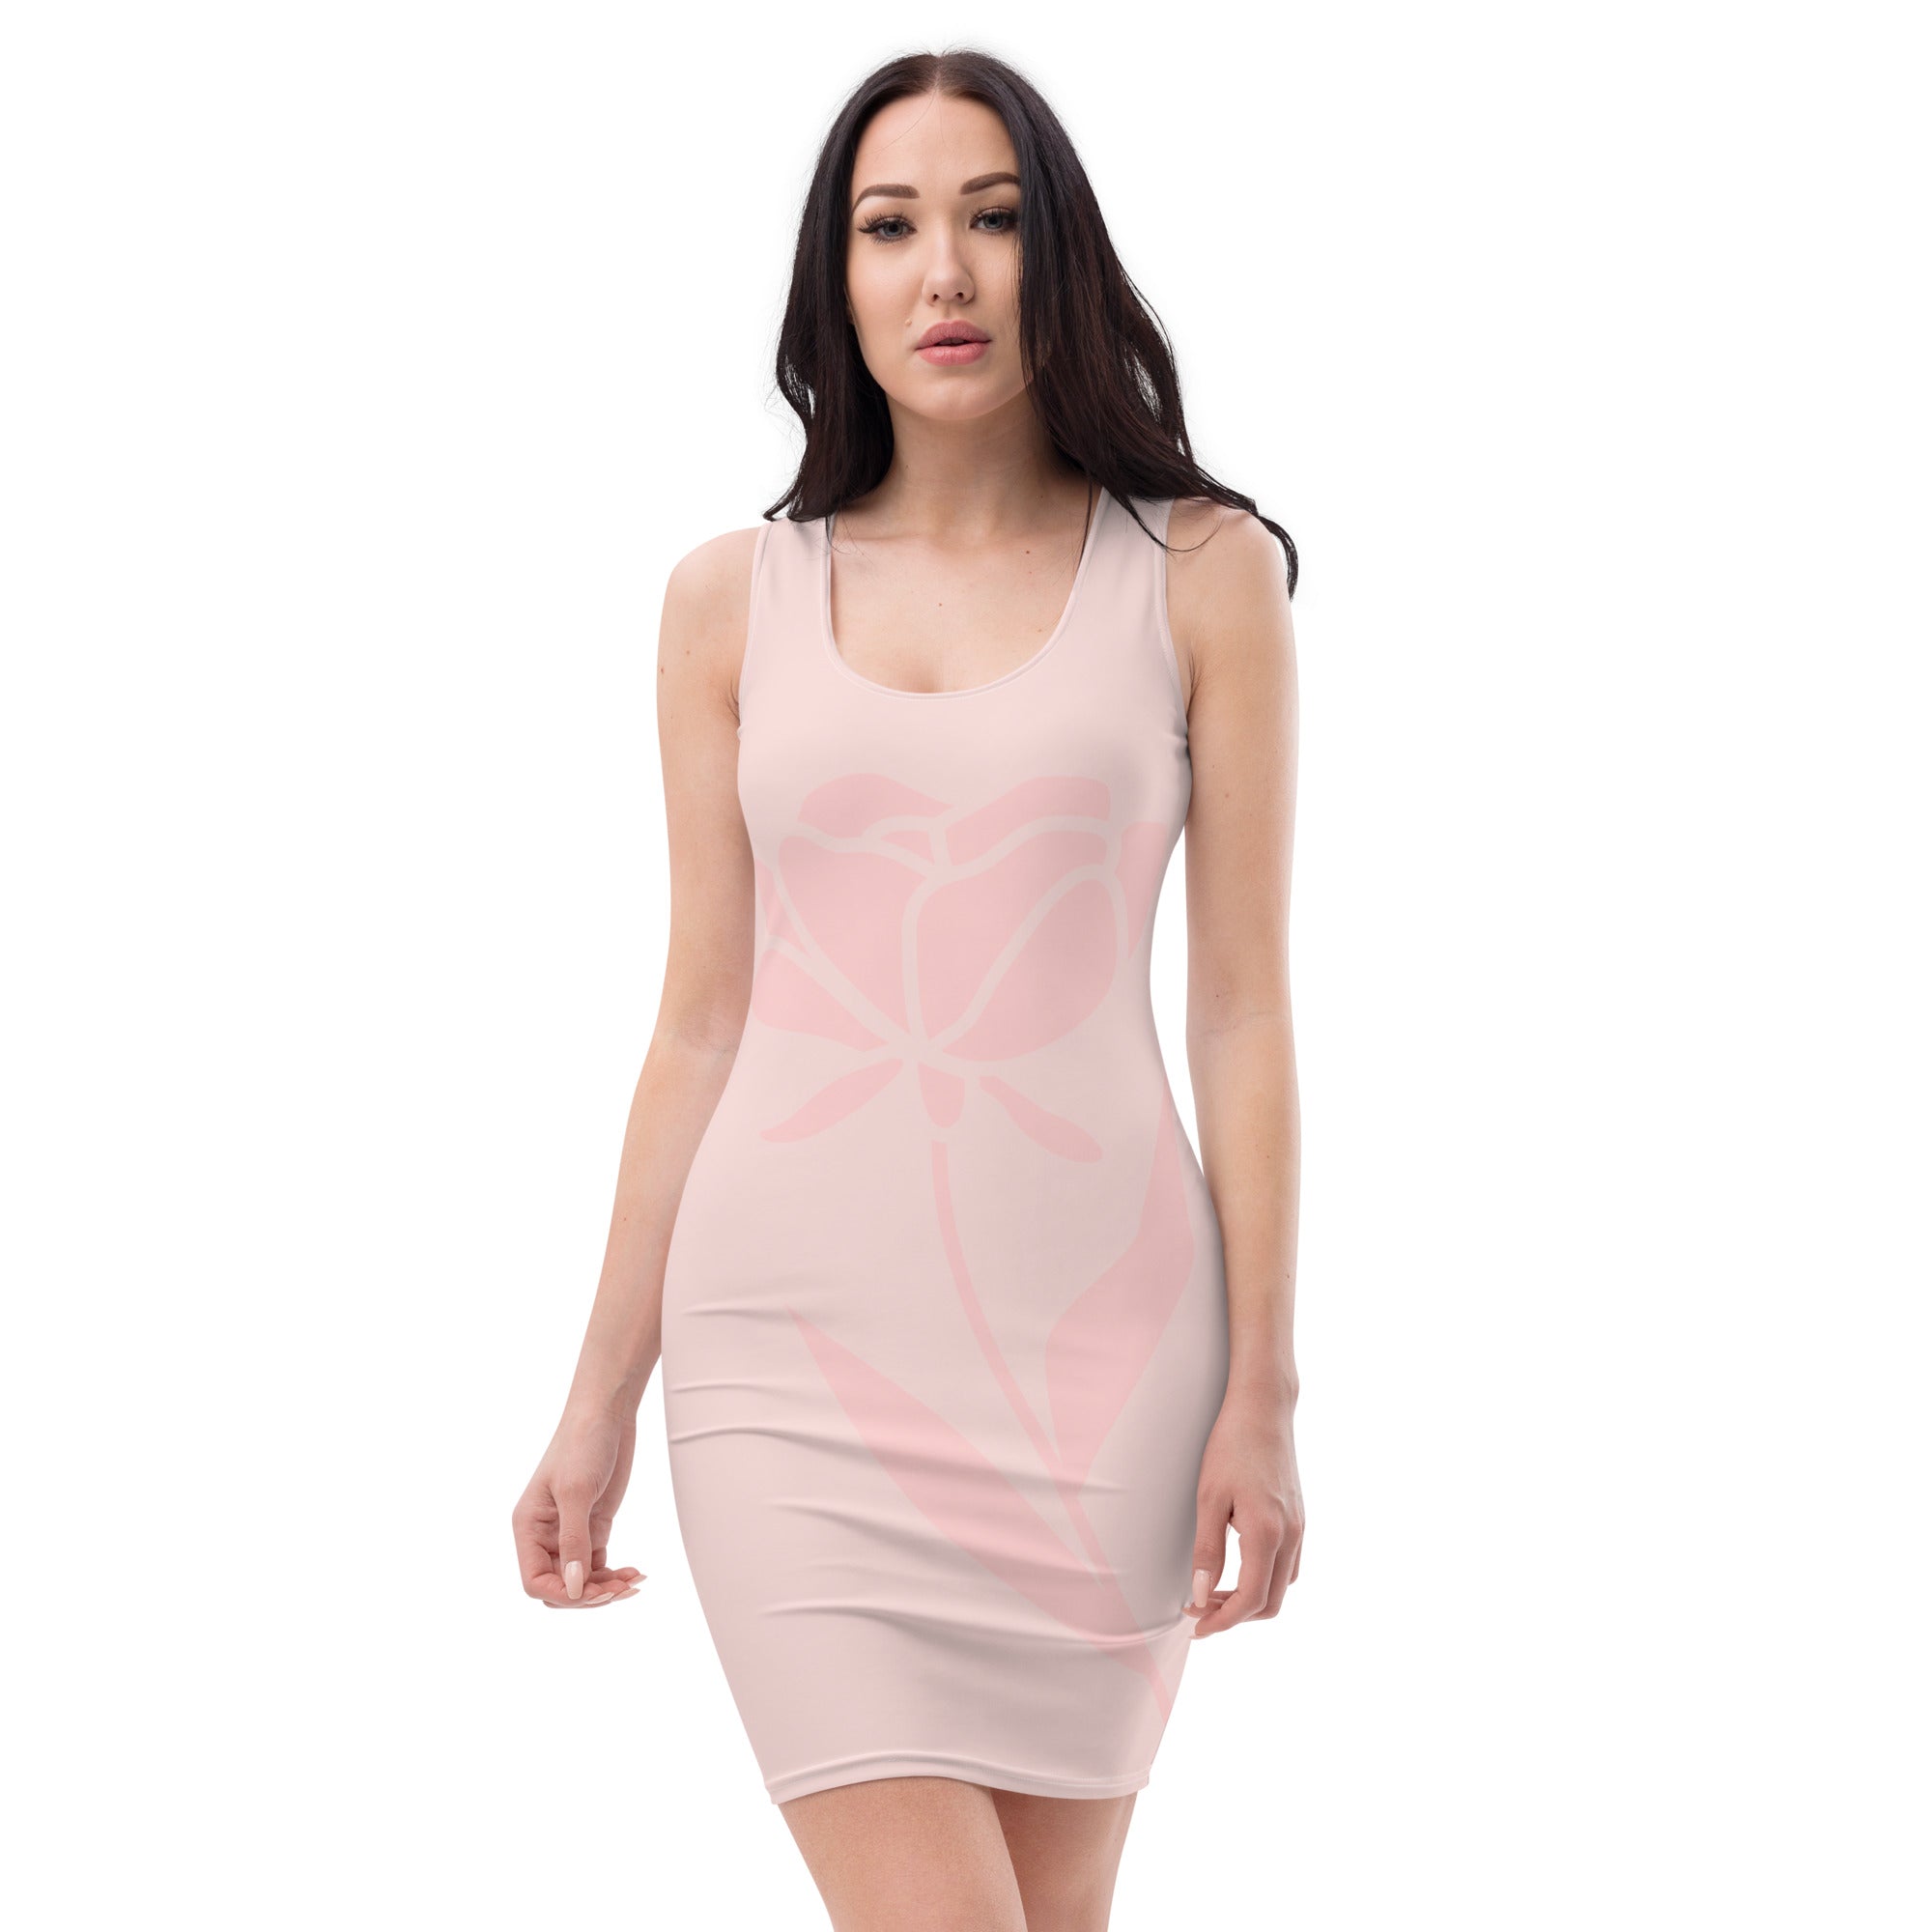 "Blush Elegance: Rose Shadow Pink Fitted Dress", lioness-love